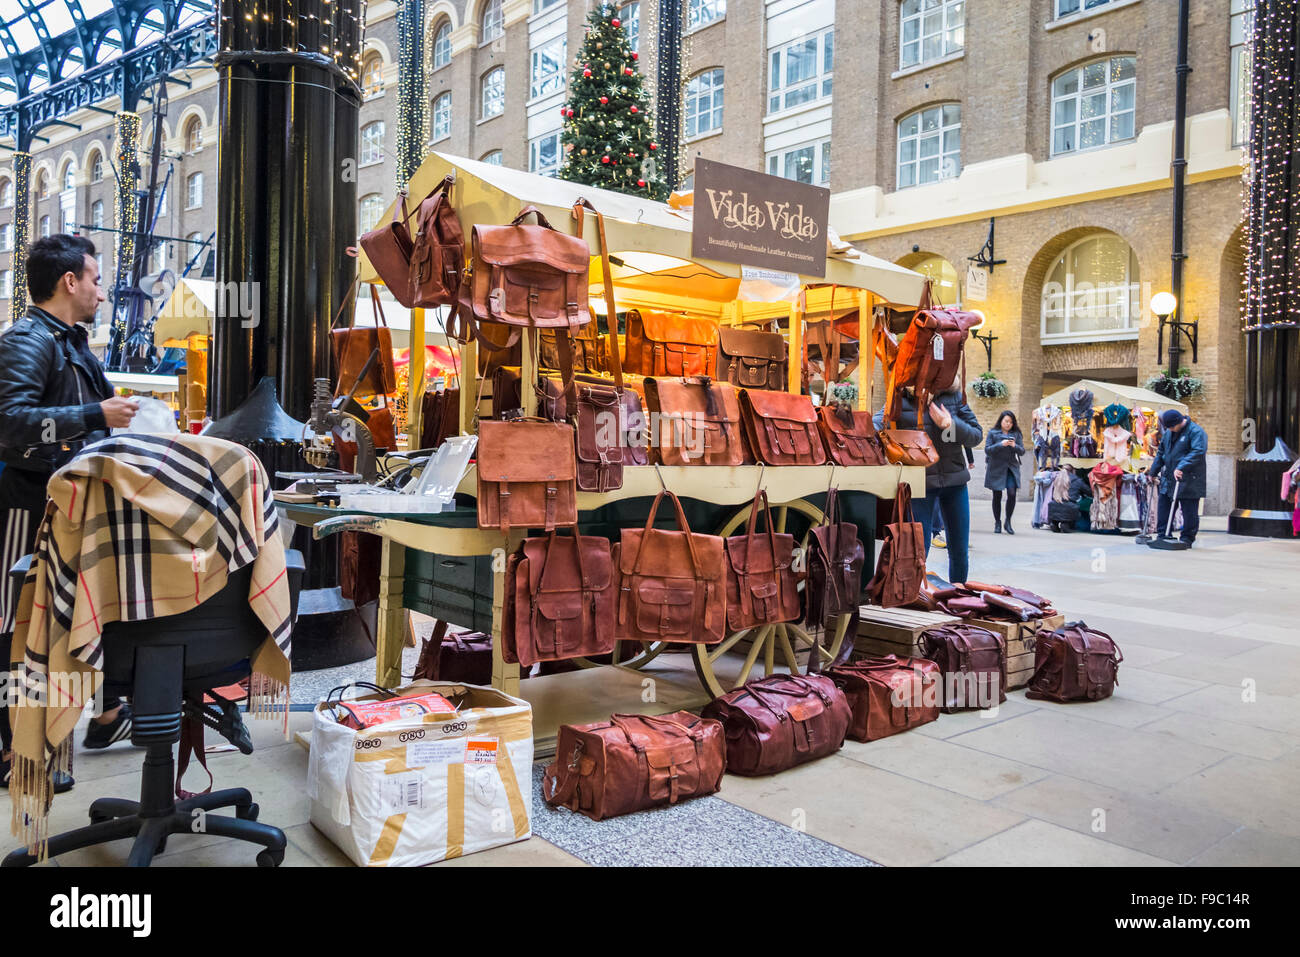 Stall selling leather handbags and satchels in the indoor Christmas market stalls in Hays Galleria, More London, Southwark SE1 Stock Photo